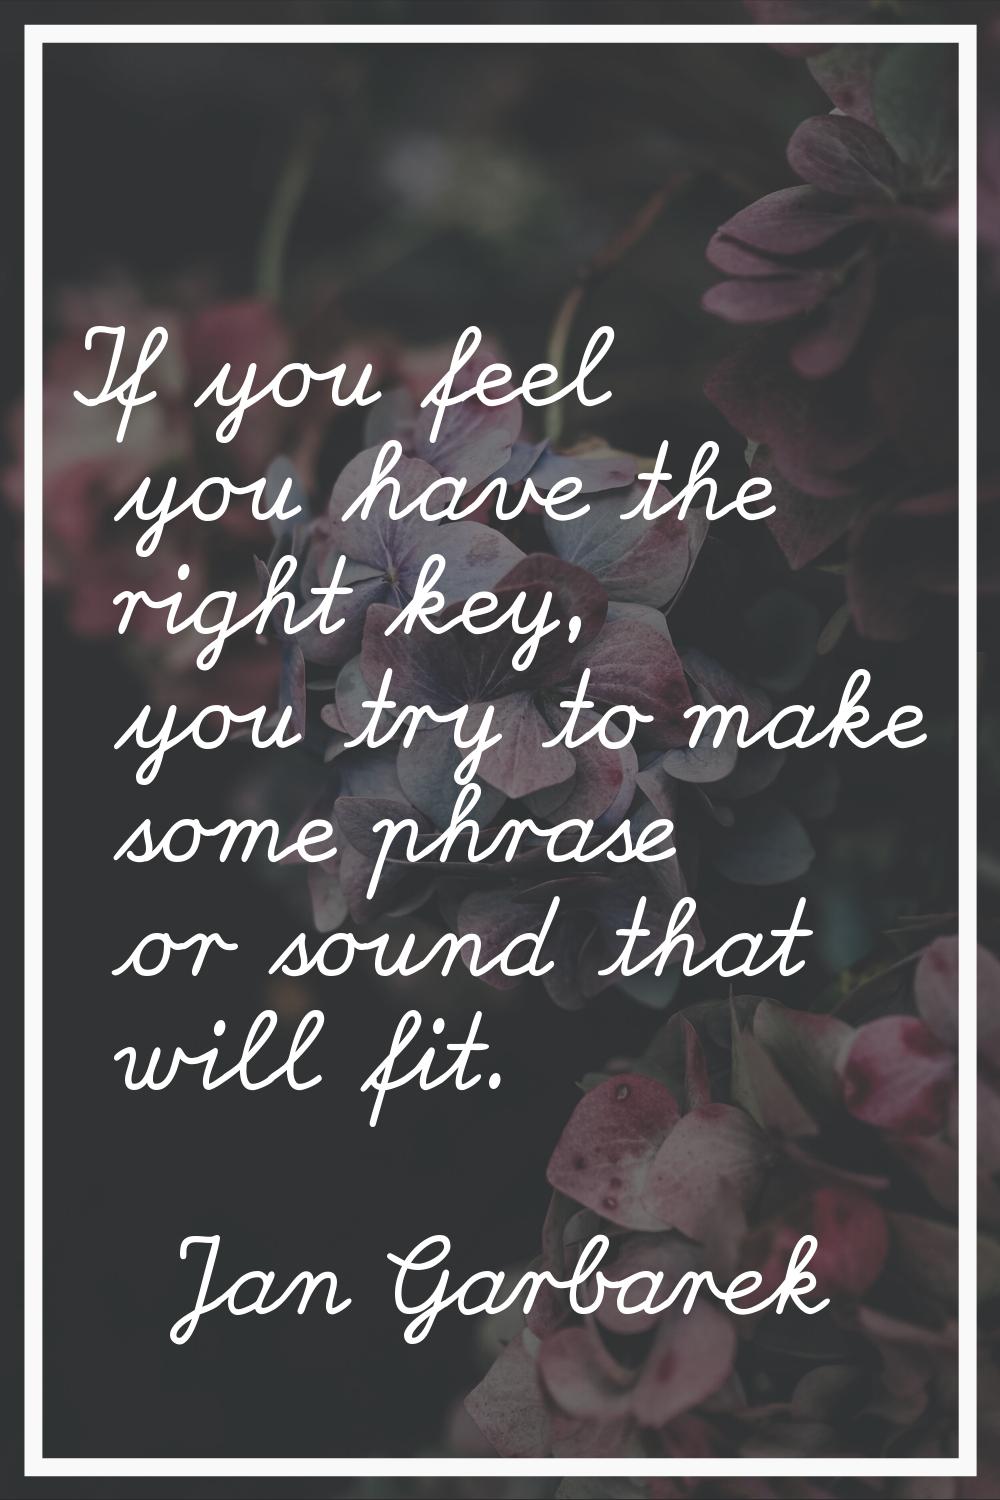 If you feel you have the right key, you try to make some phrase or sound that will fit.